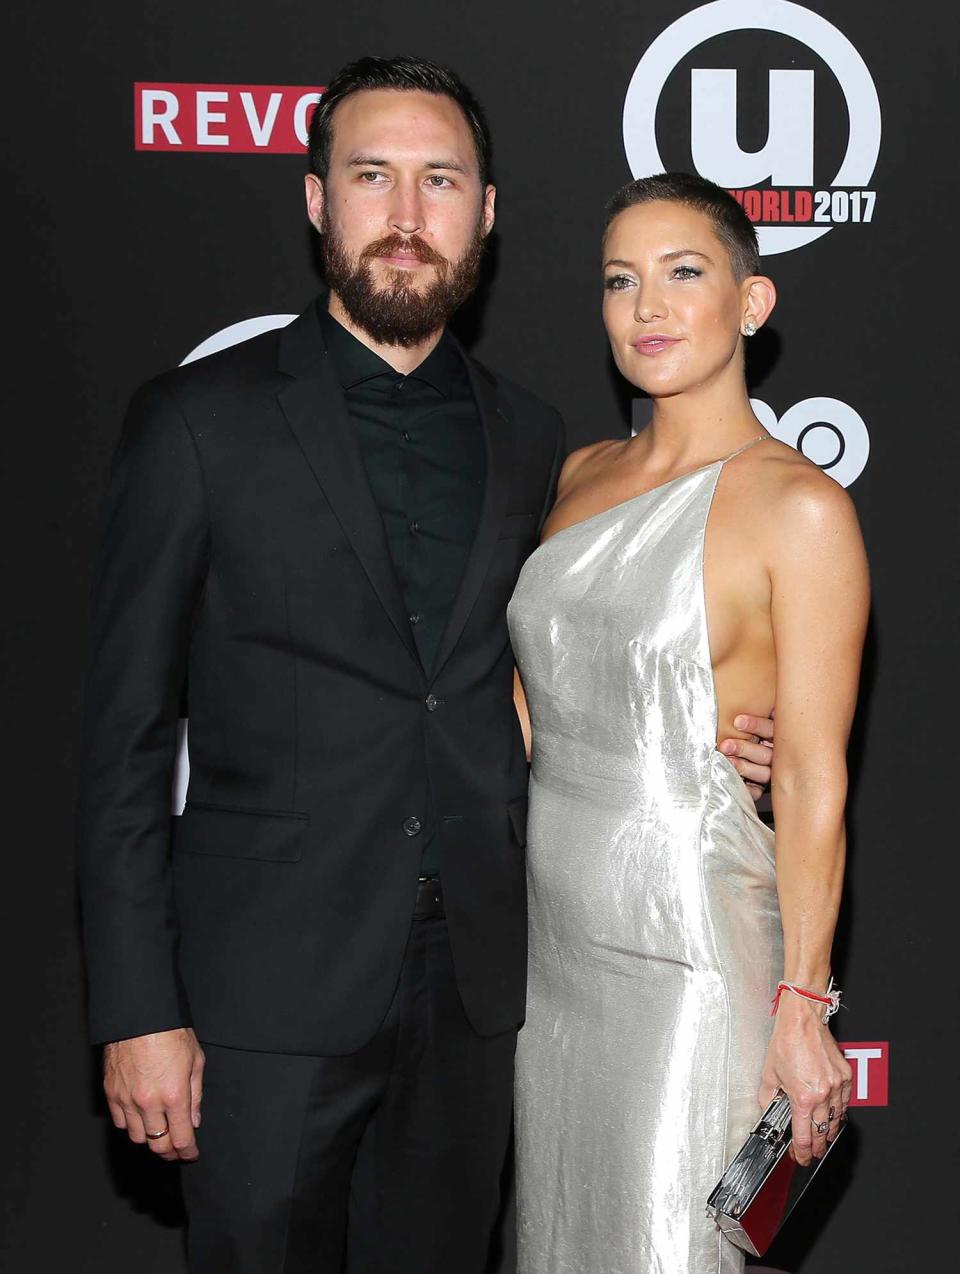 Kate Hudson (R) and Danny Fujikawa attend the 21st Annual Urbanworld Film Festival at AMC Empire 25 theater on September 23, 2017 in New York City.